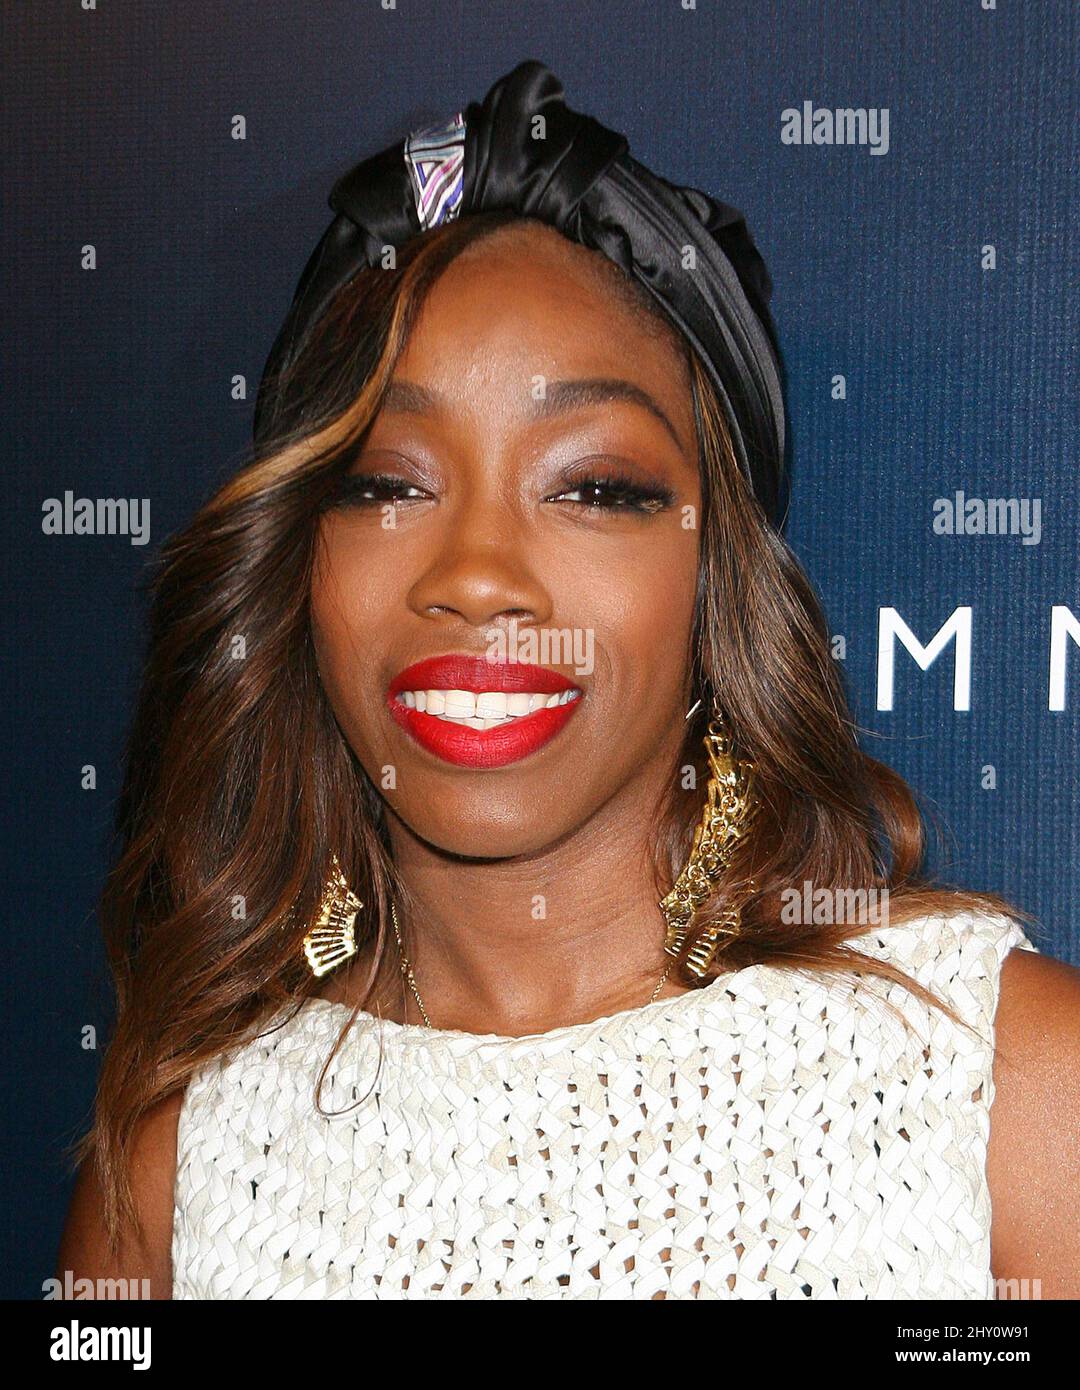 Estelle attending the Tommy Hilfiger West Coast Flagship store opening  event held in Hollywood, California Stock Photo - Alamy